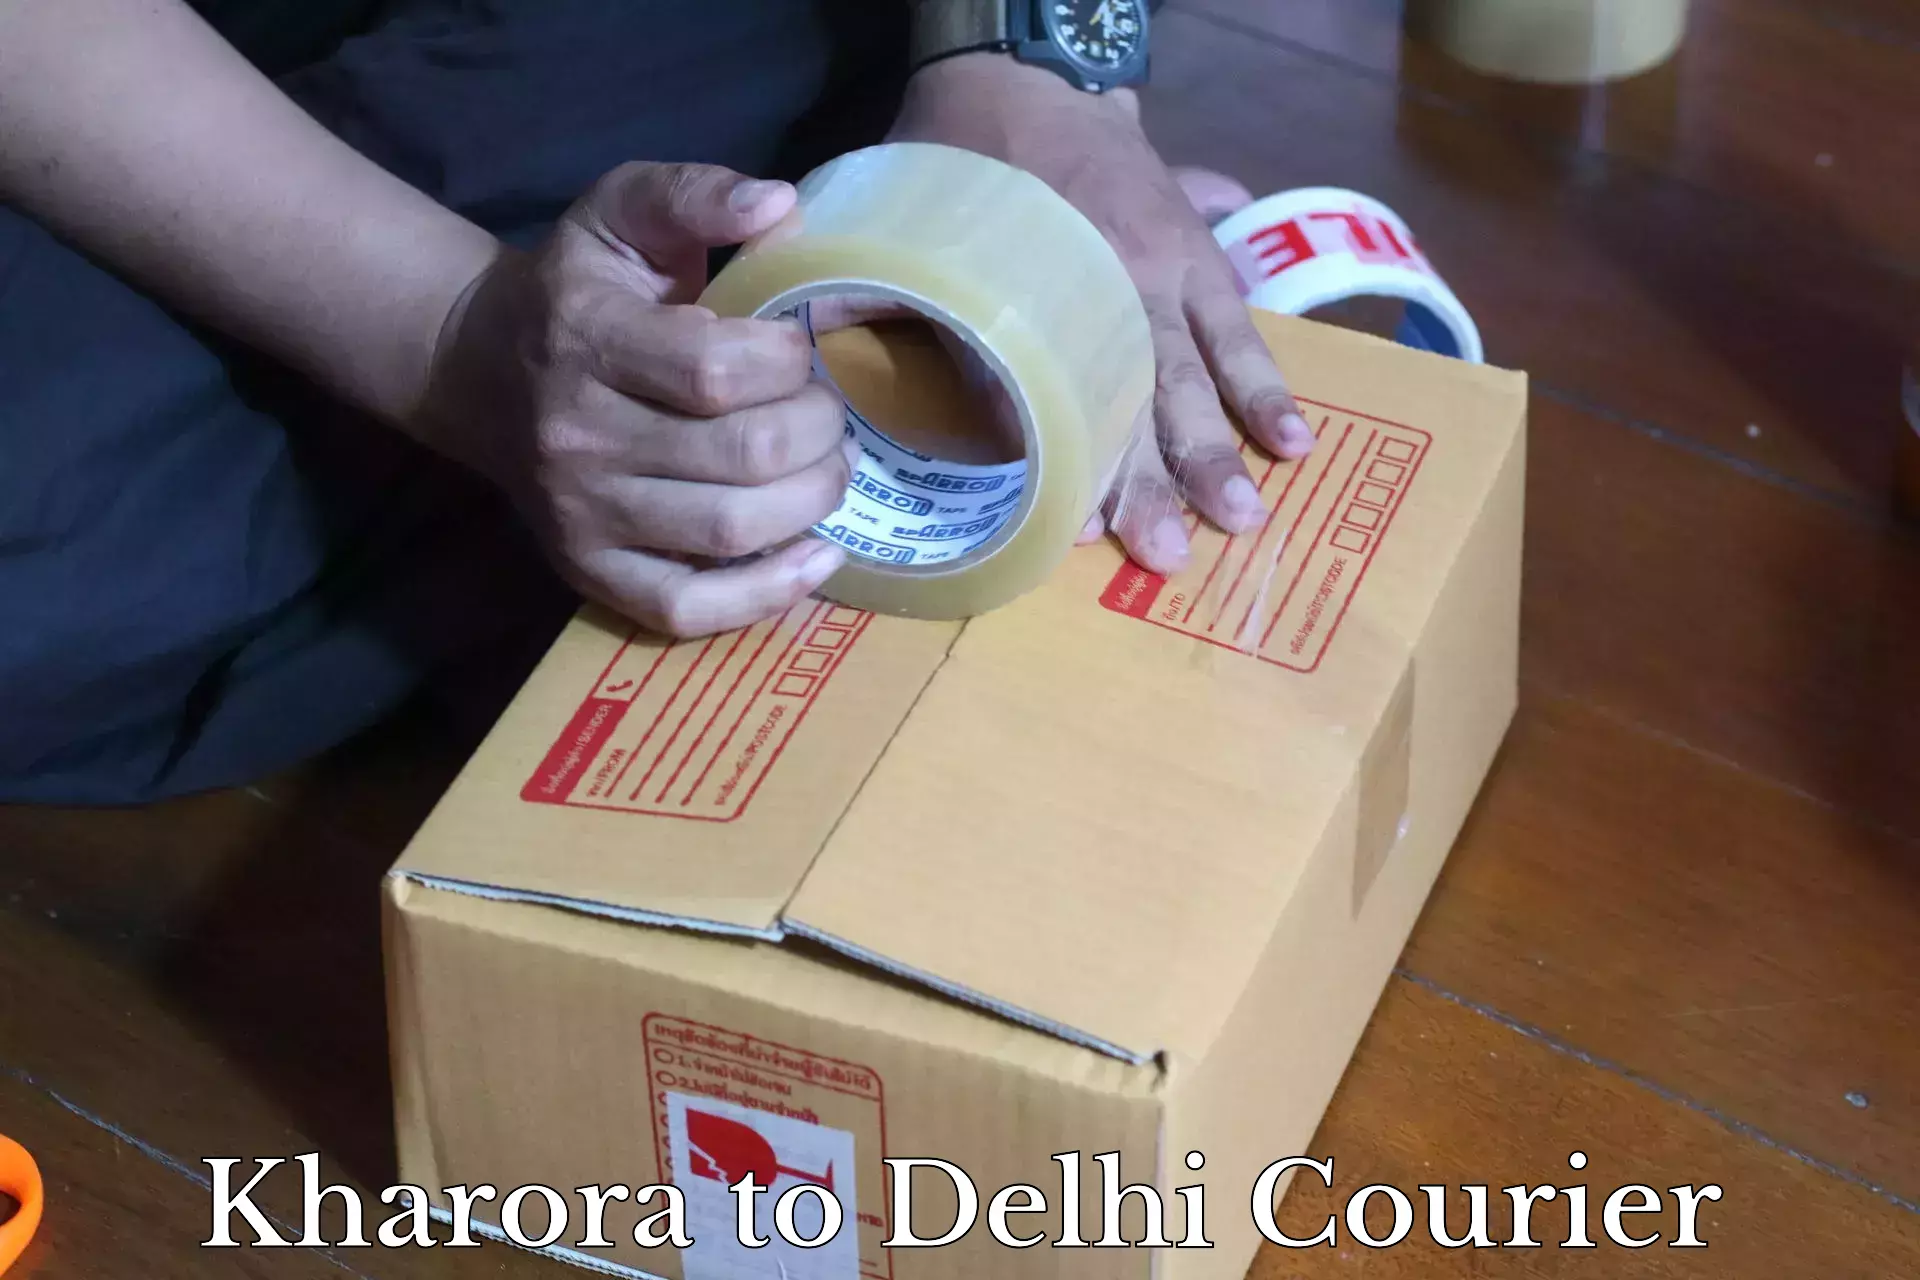 Automated shipping processes Kharora to NCR